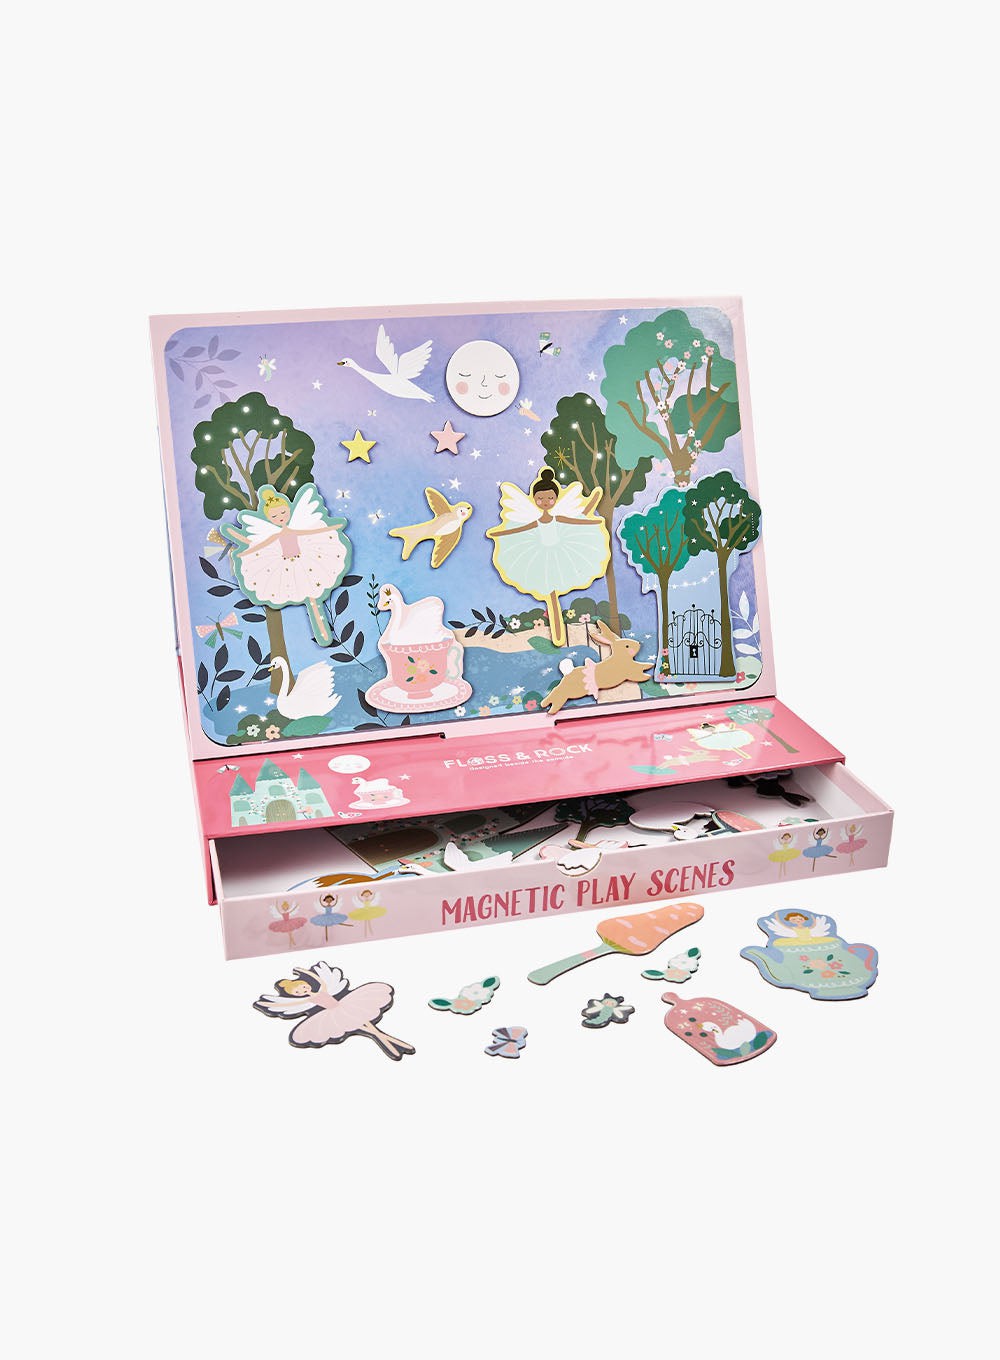 Floss & Rock Toy Floss & Rock Enchanted Magnetic Play Scenes